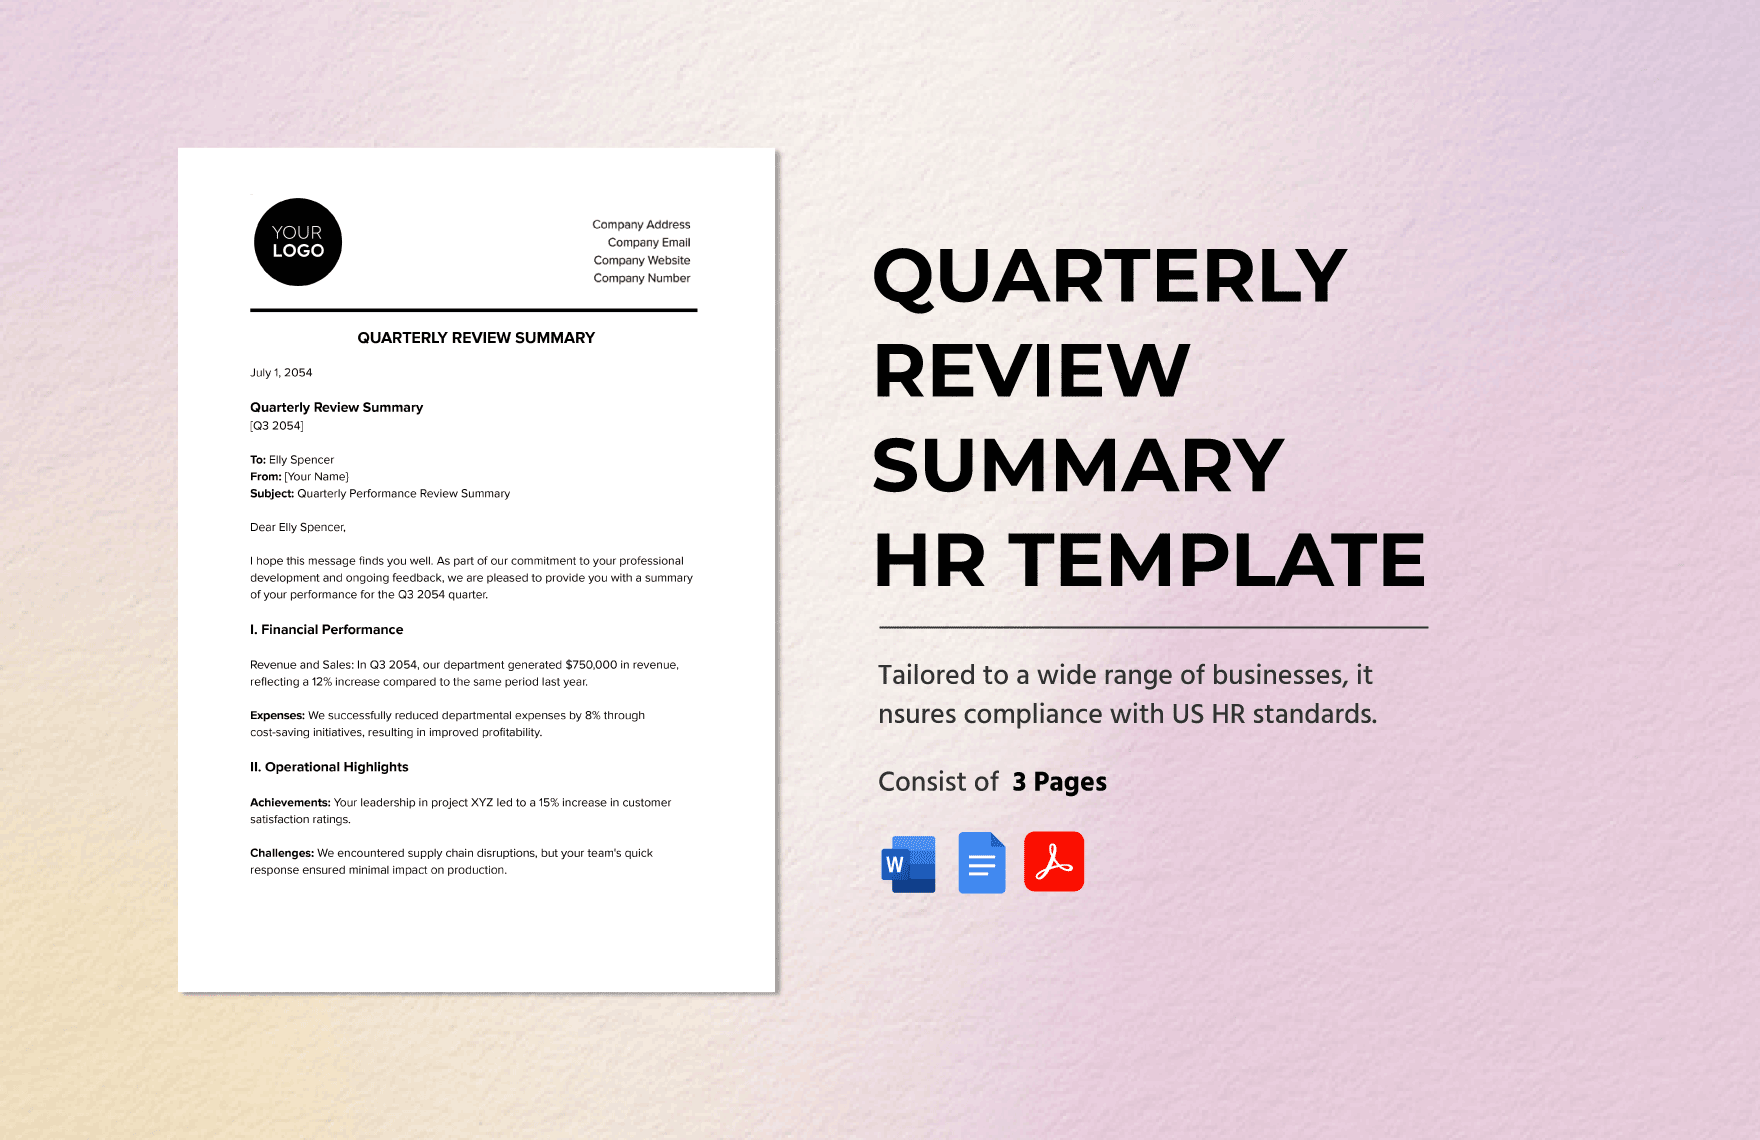 Quarterly Review Summary HR Template